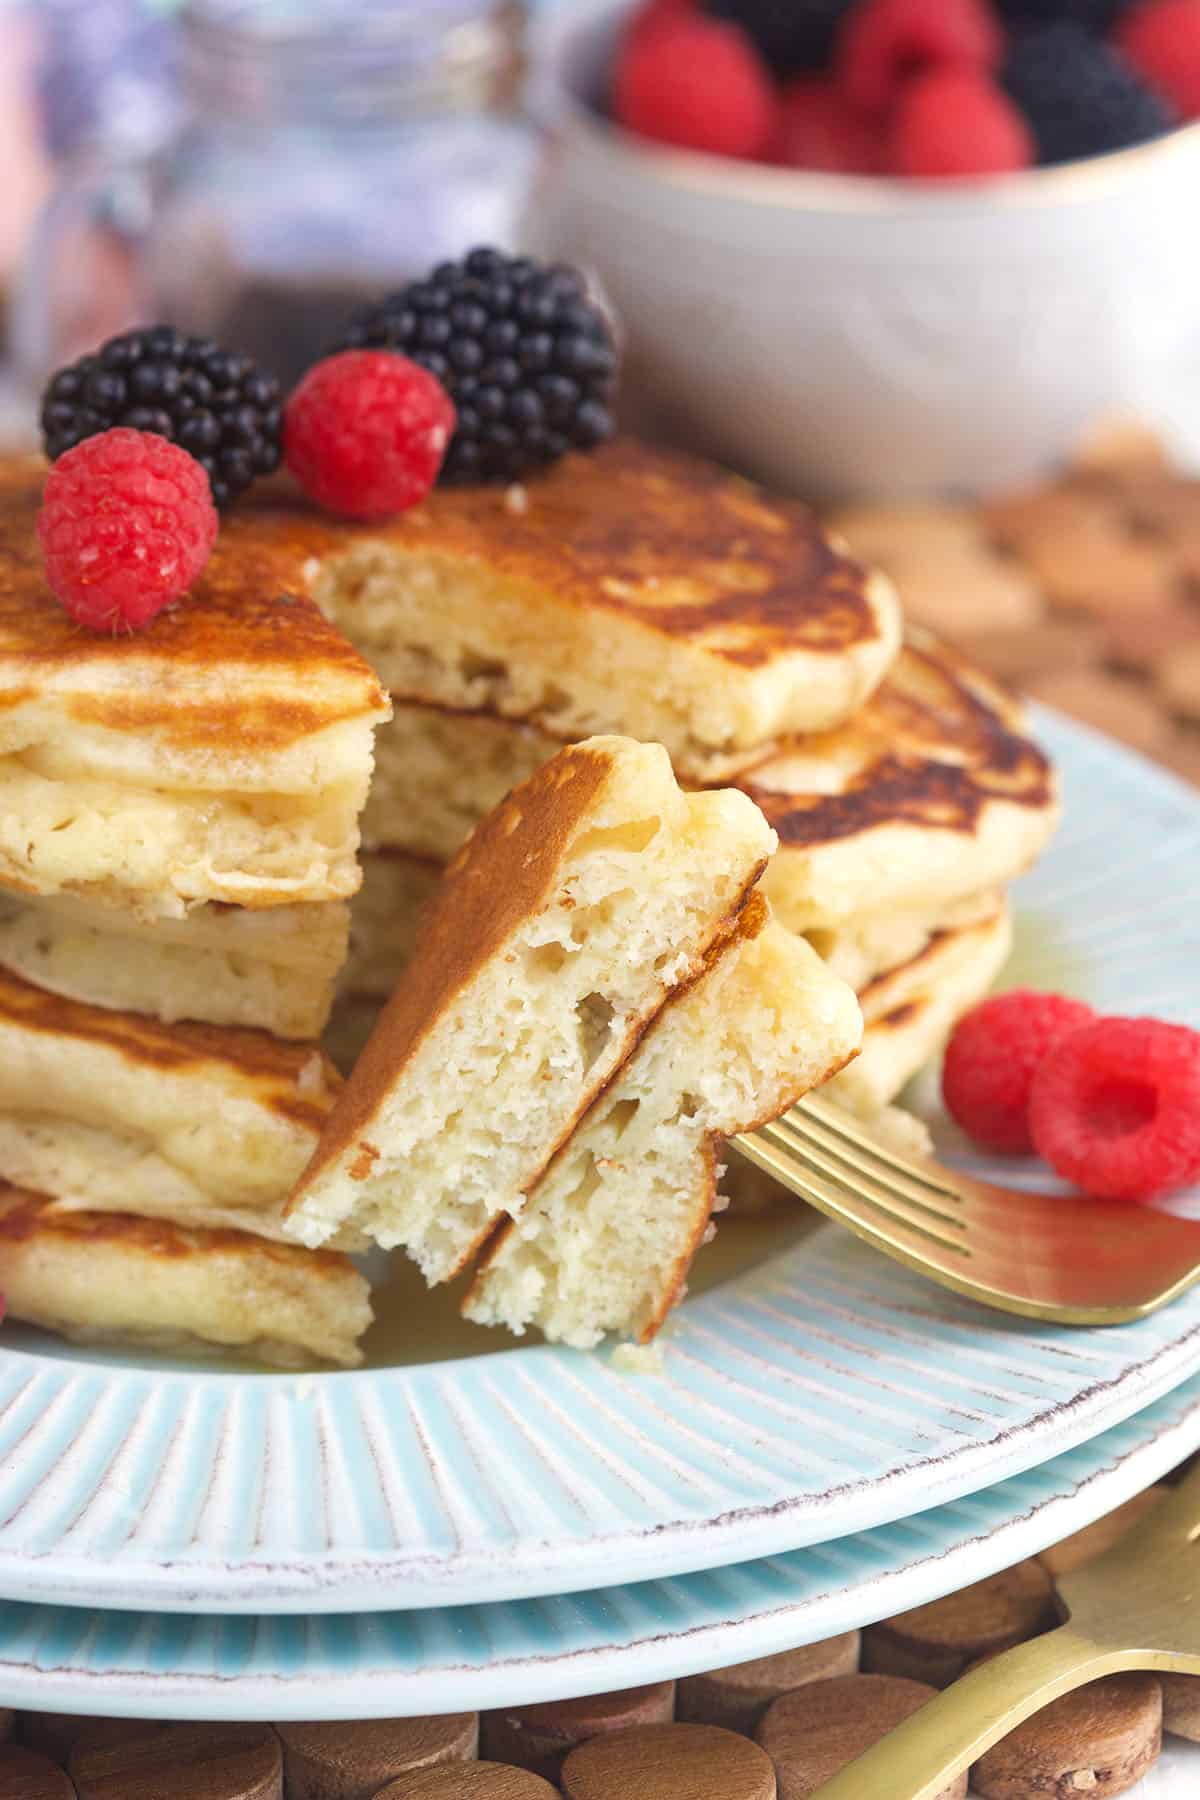 A bite of pancakes has been removed from the stack. 